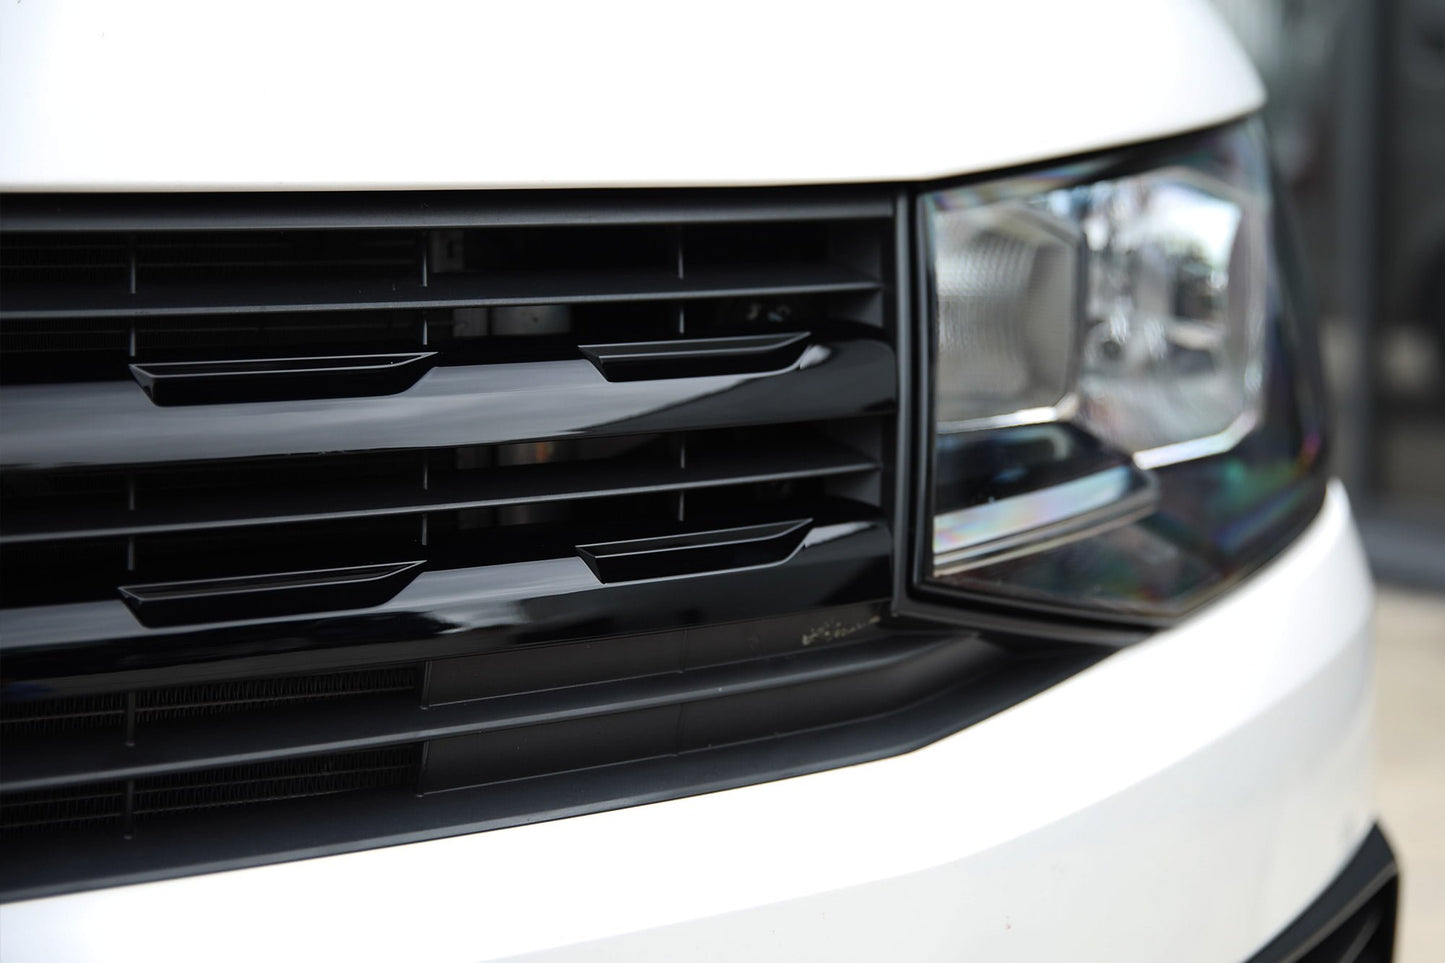 VW Transporter T6 R-Line Front Grille Trims - Gloss Black Painted and Ready to Fit